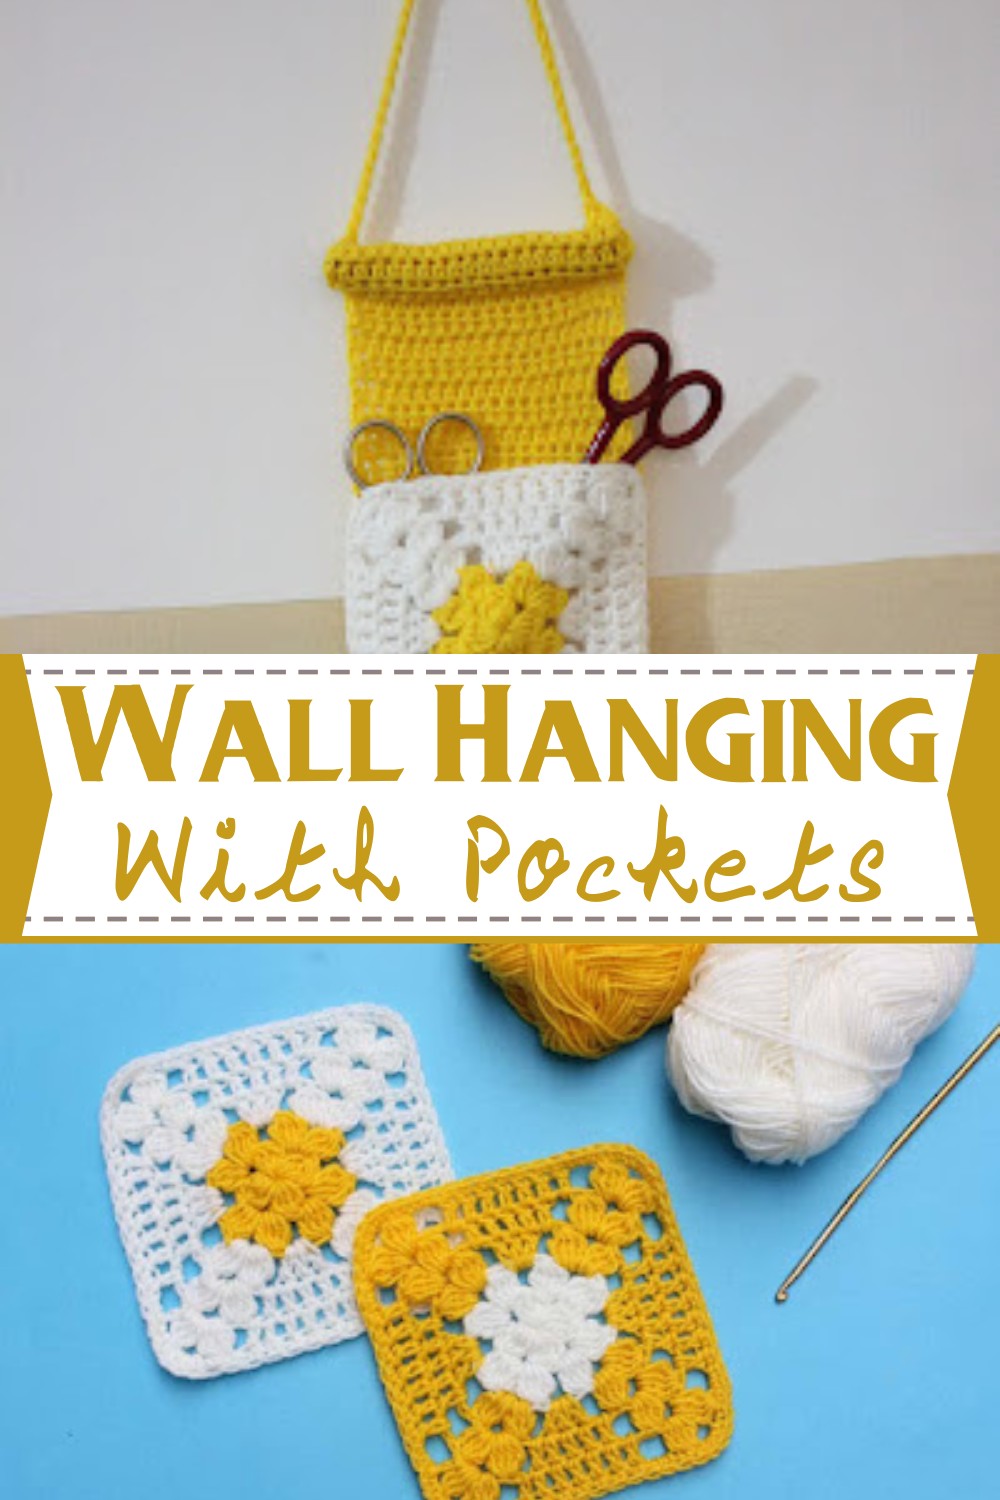 Crochet Wall Hanging With Pockets